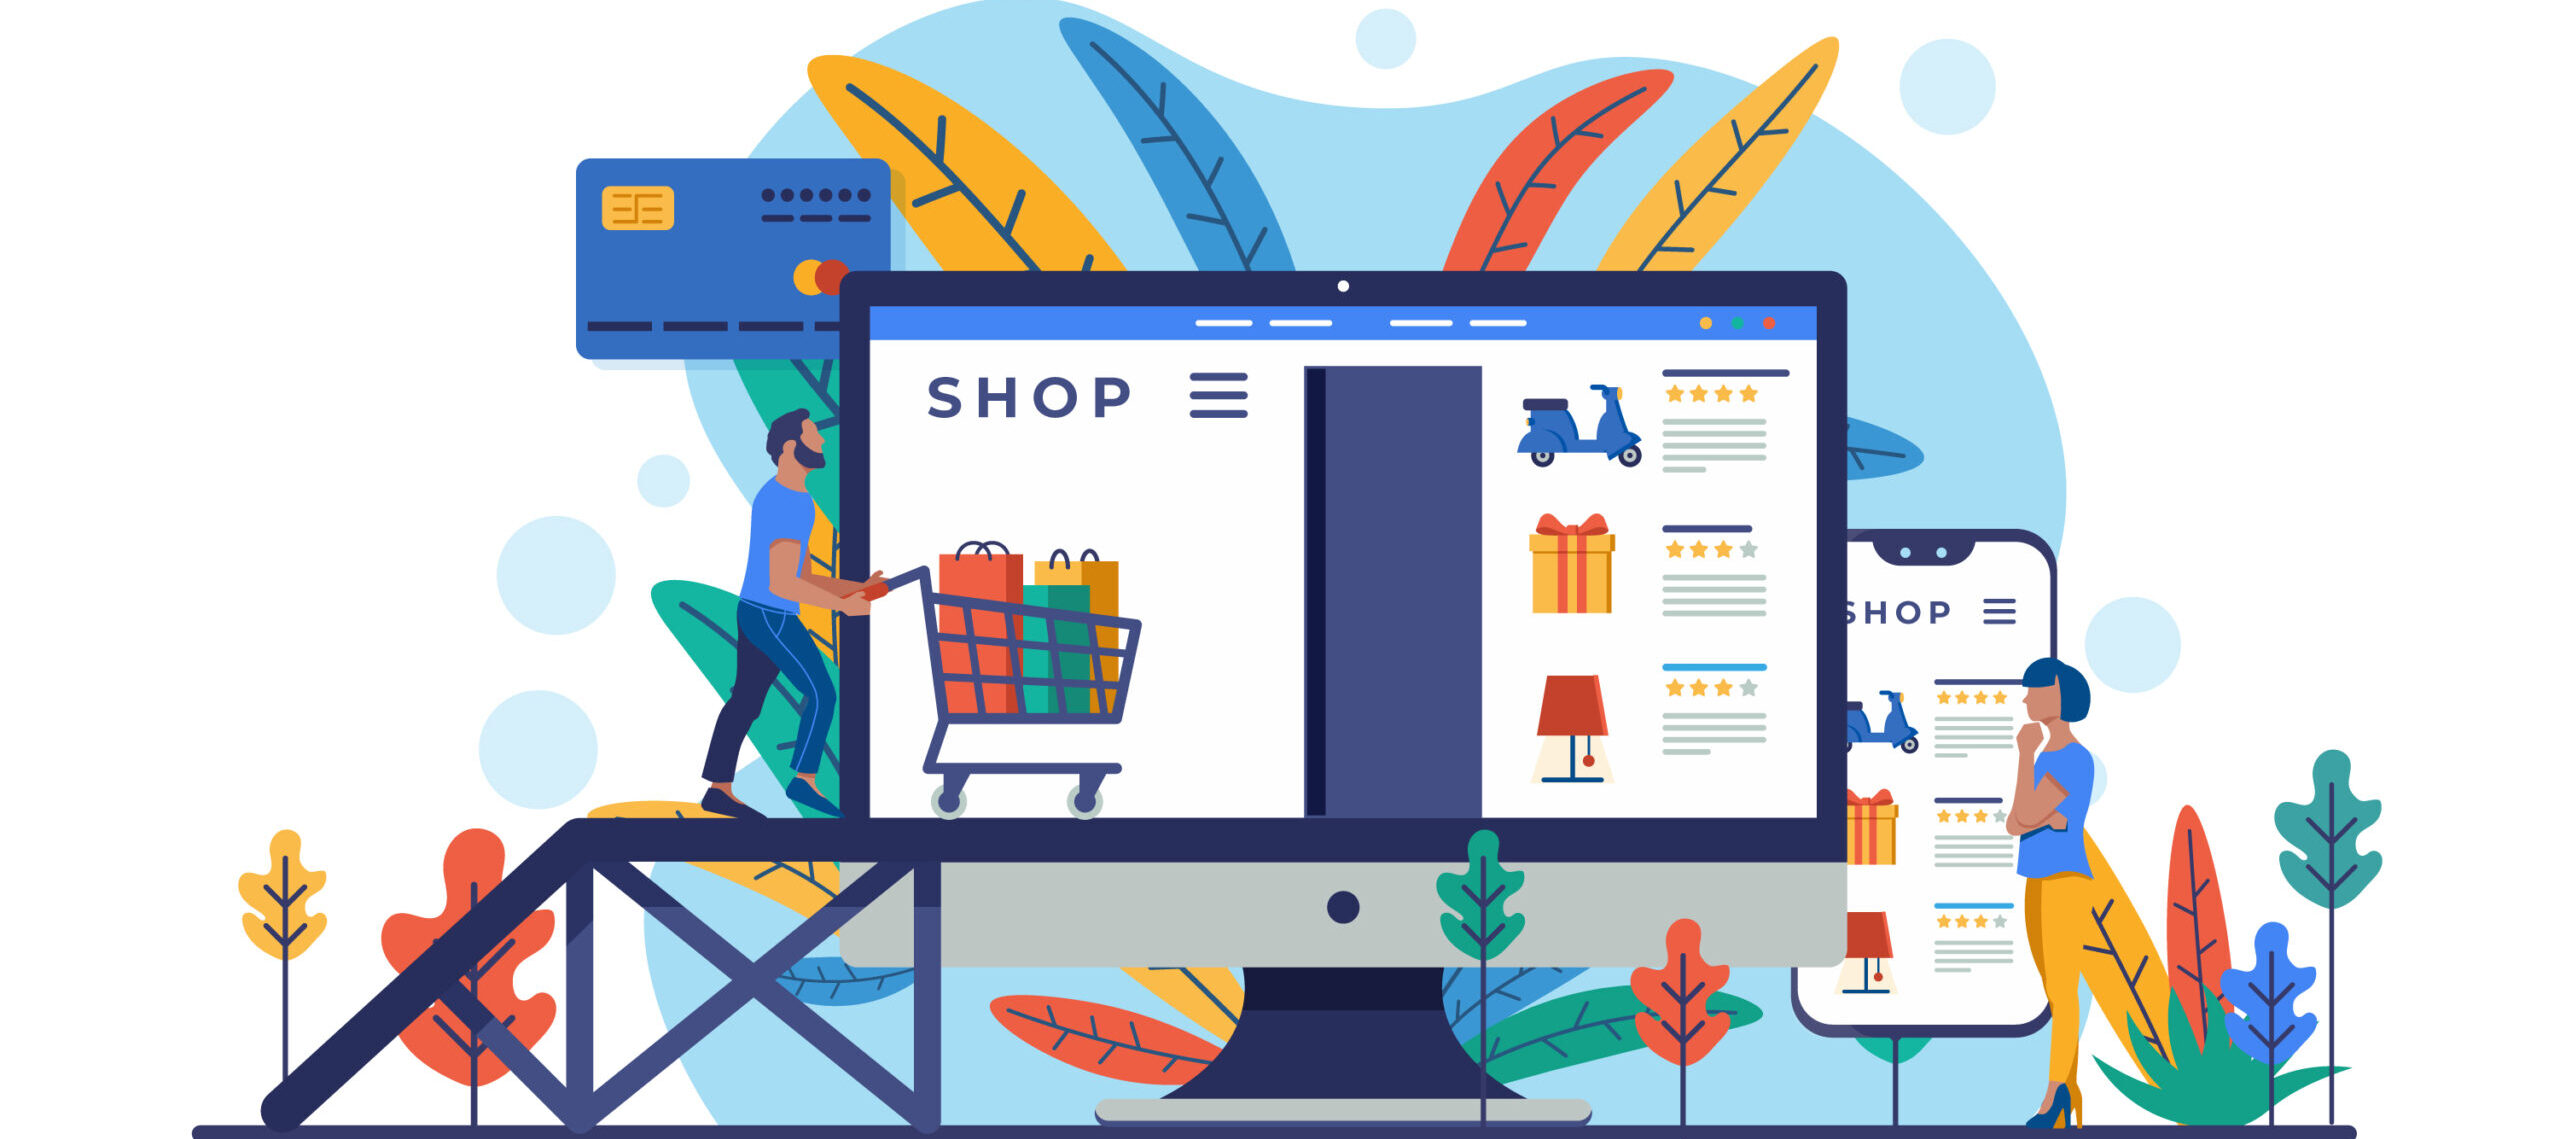 Top 10 Web Design Tips for An E-commerce Site